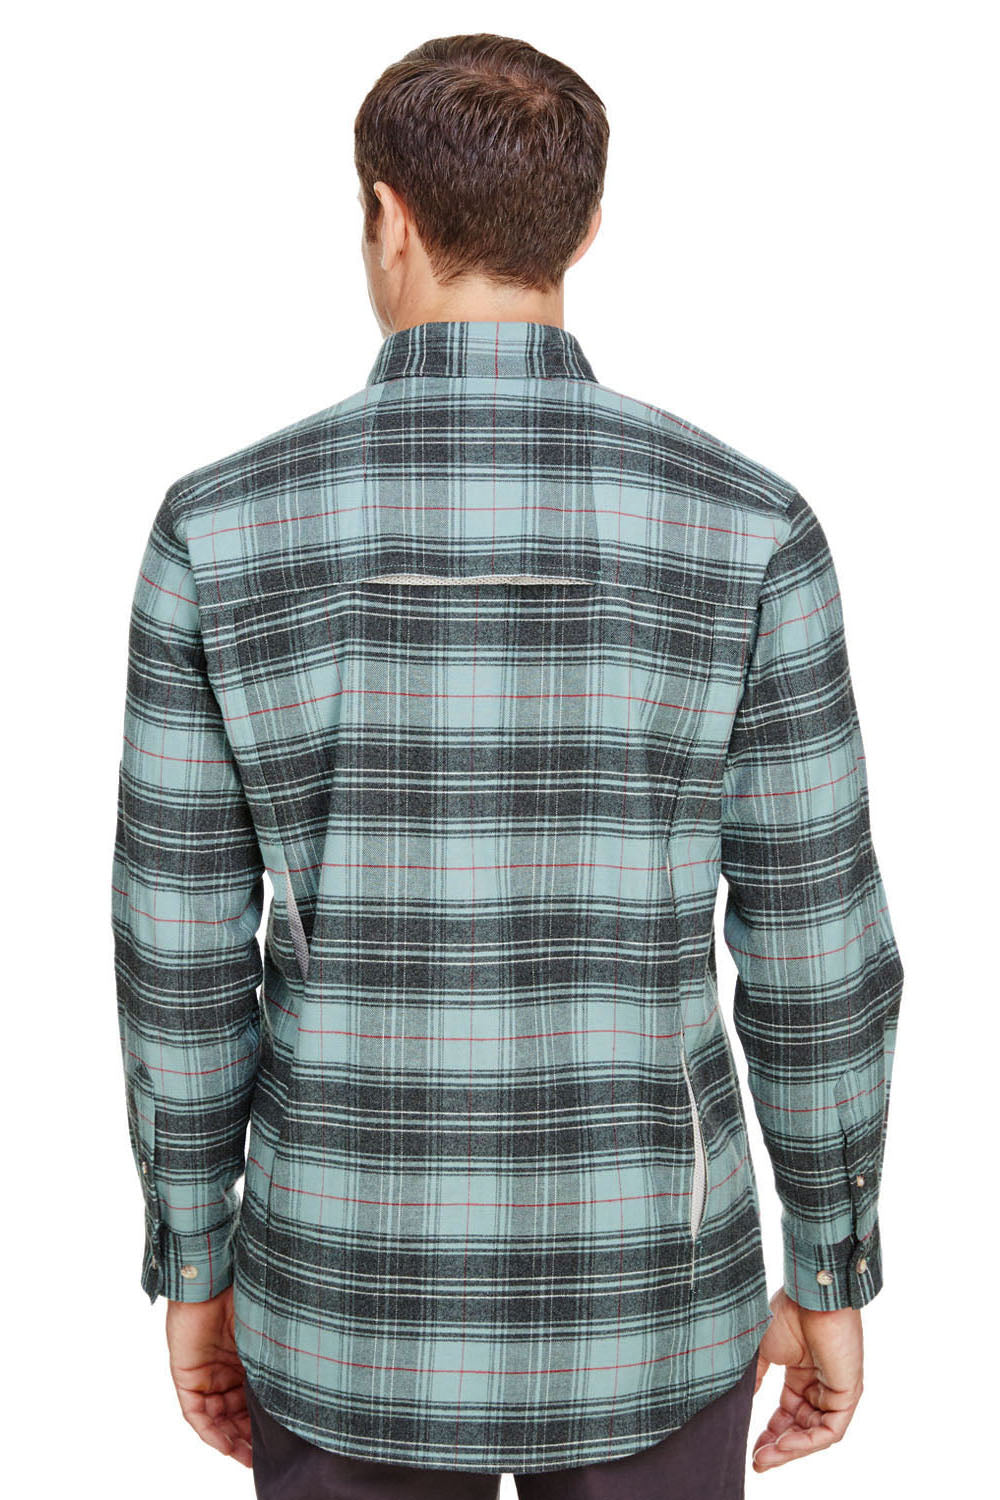 Backpacker BP7091 Mens Stretch Flannel Long Sleeve Button Down Shirt w/ Double Pockets Teal Blue Back